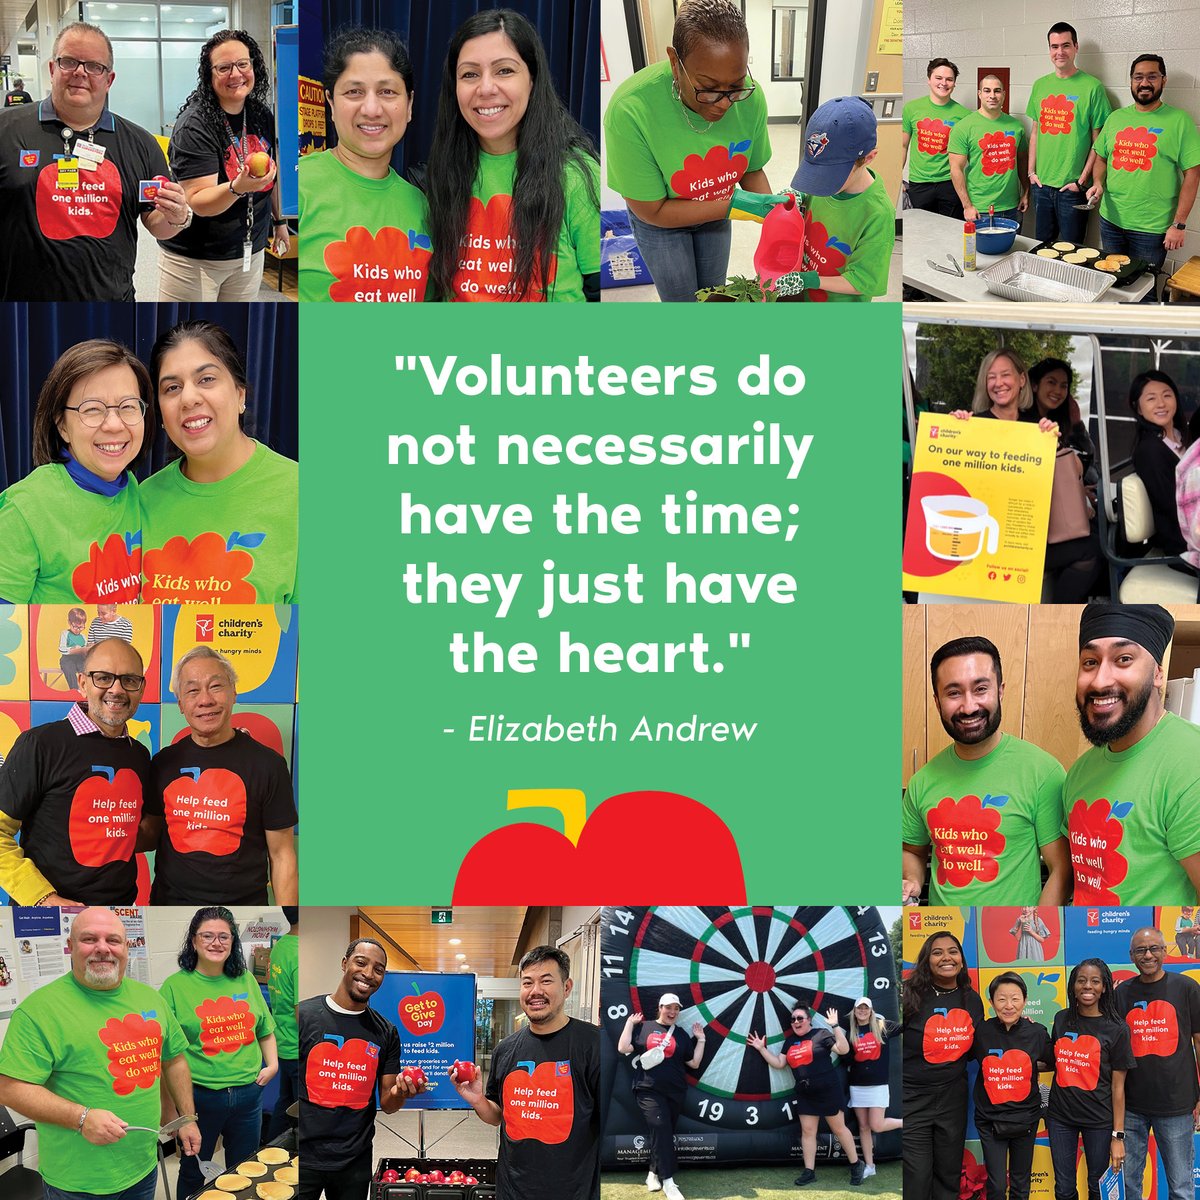 There is no group of people with bigger hearts than our volunteers! 💓 We could not feed kids at schools across Canada without your dedication and commitment to helping at our fundraising events or in #PowerFullKids programs nationwide. THANK YOU. #NationalVolunteerWeek